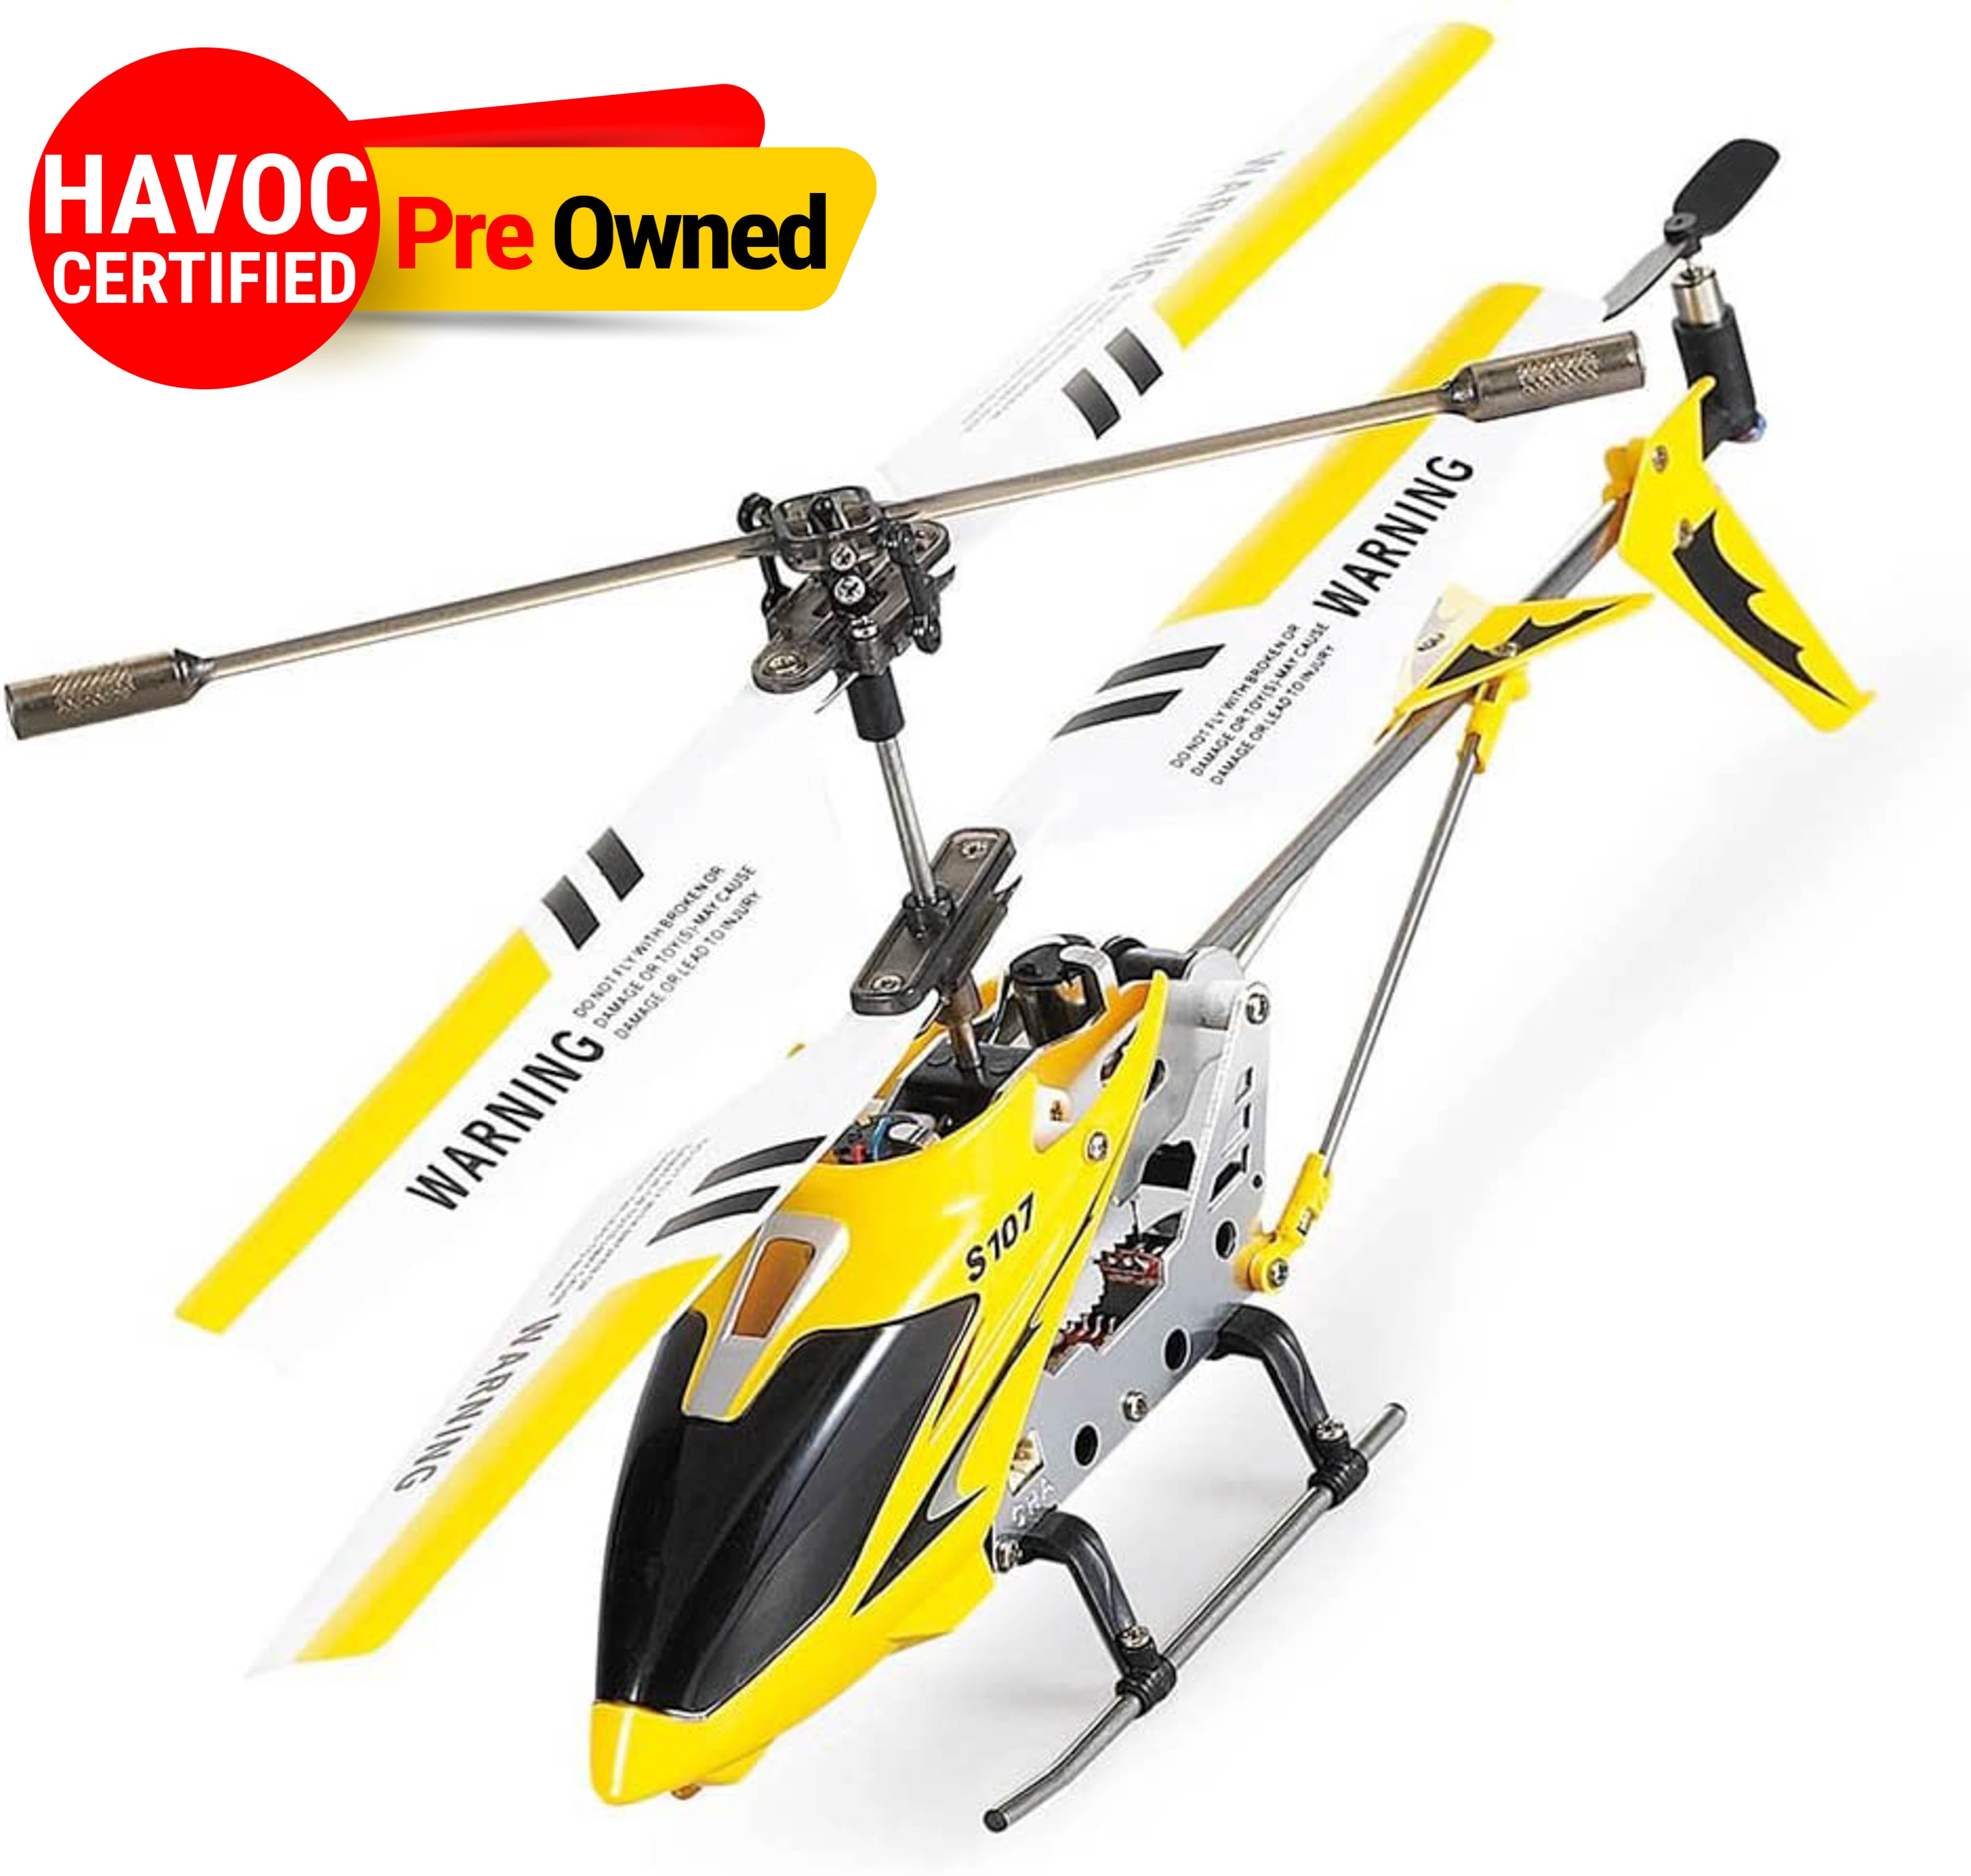 Syma 3 Channel S107 Mini Indoor Co-Axial Metal Body Frame & Built-In Gyroscope Helicopter Yellow&White(Quality Pre Owned)